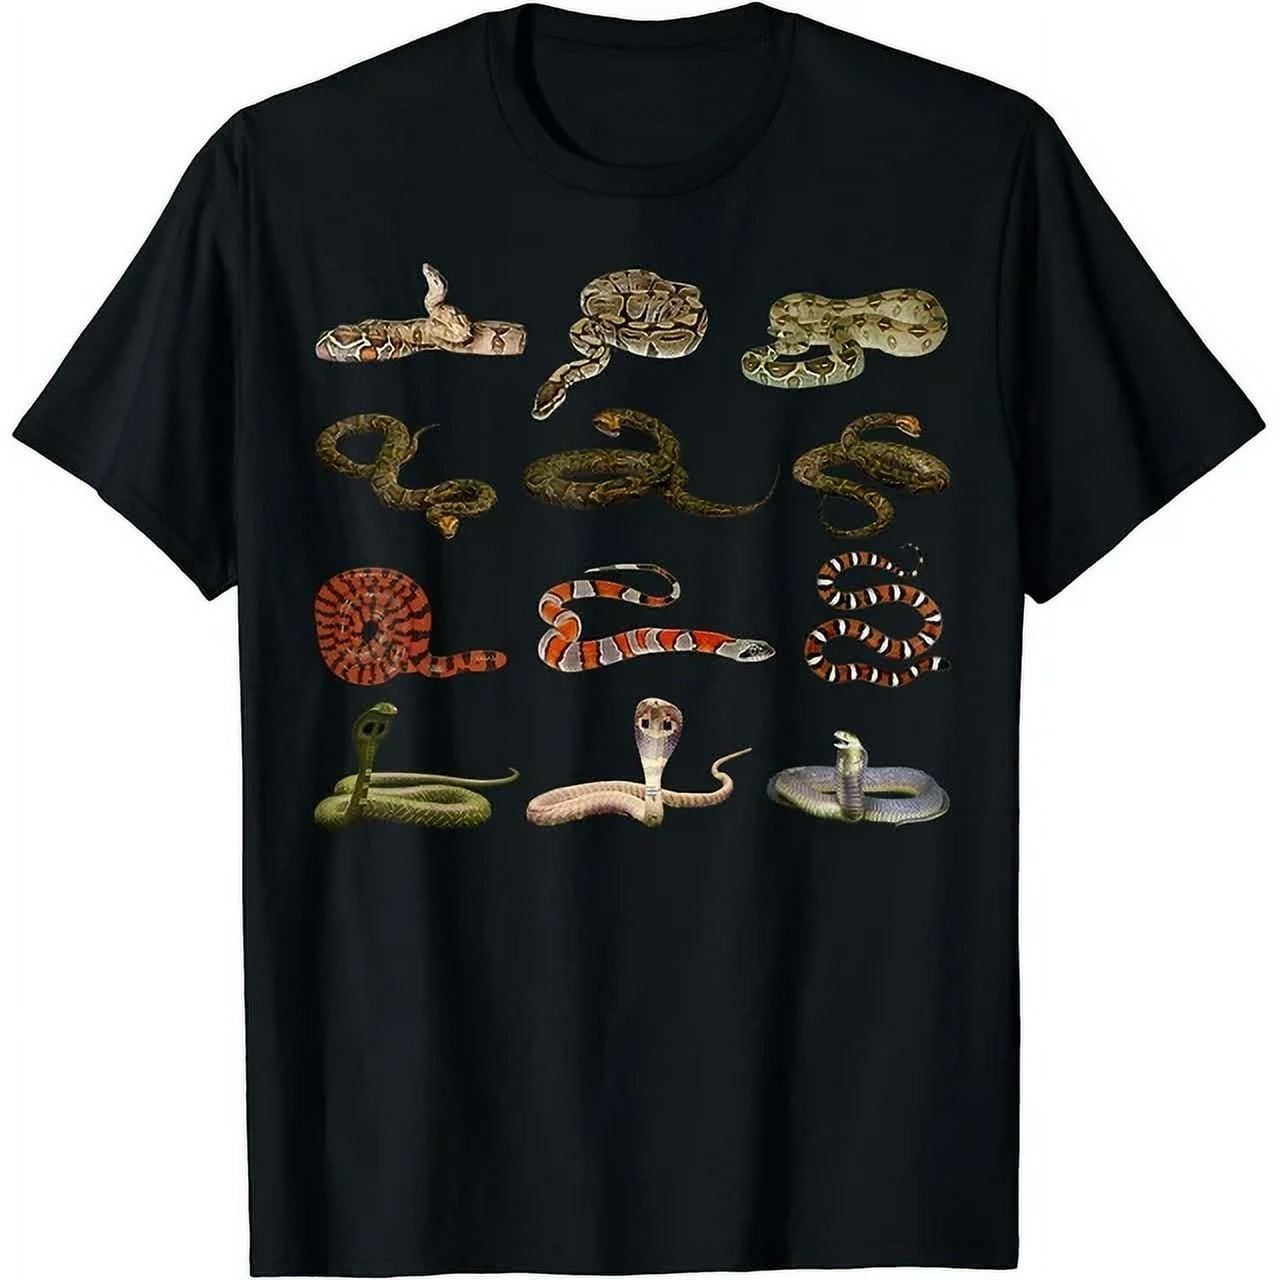 Cotton Pattern & Letters Printed T-Shirt Different Types Of Snakes Boys ...